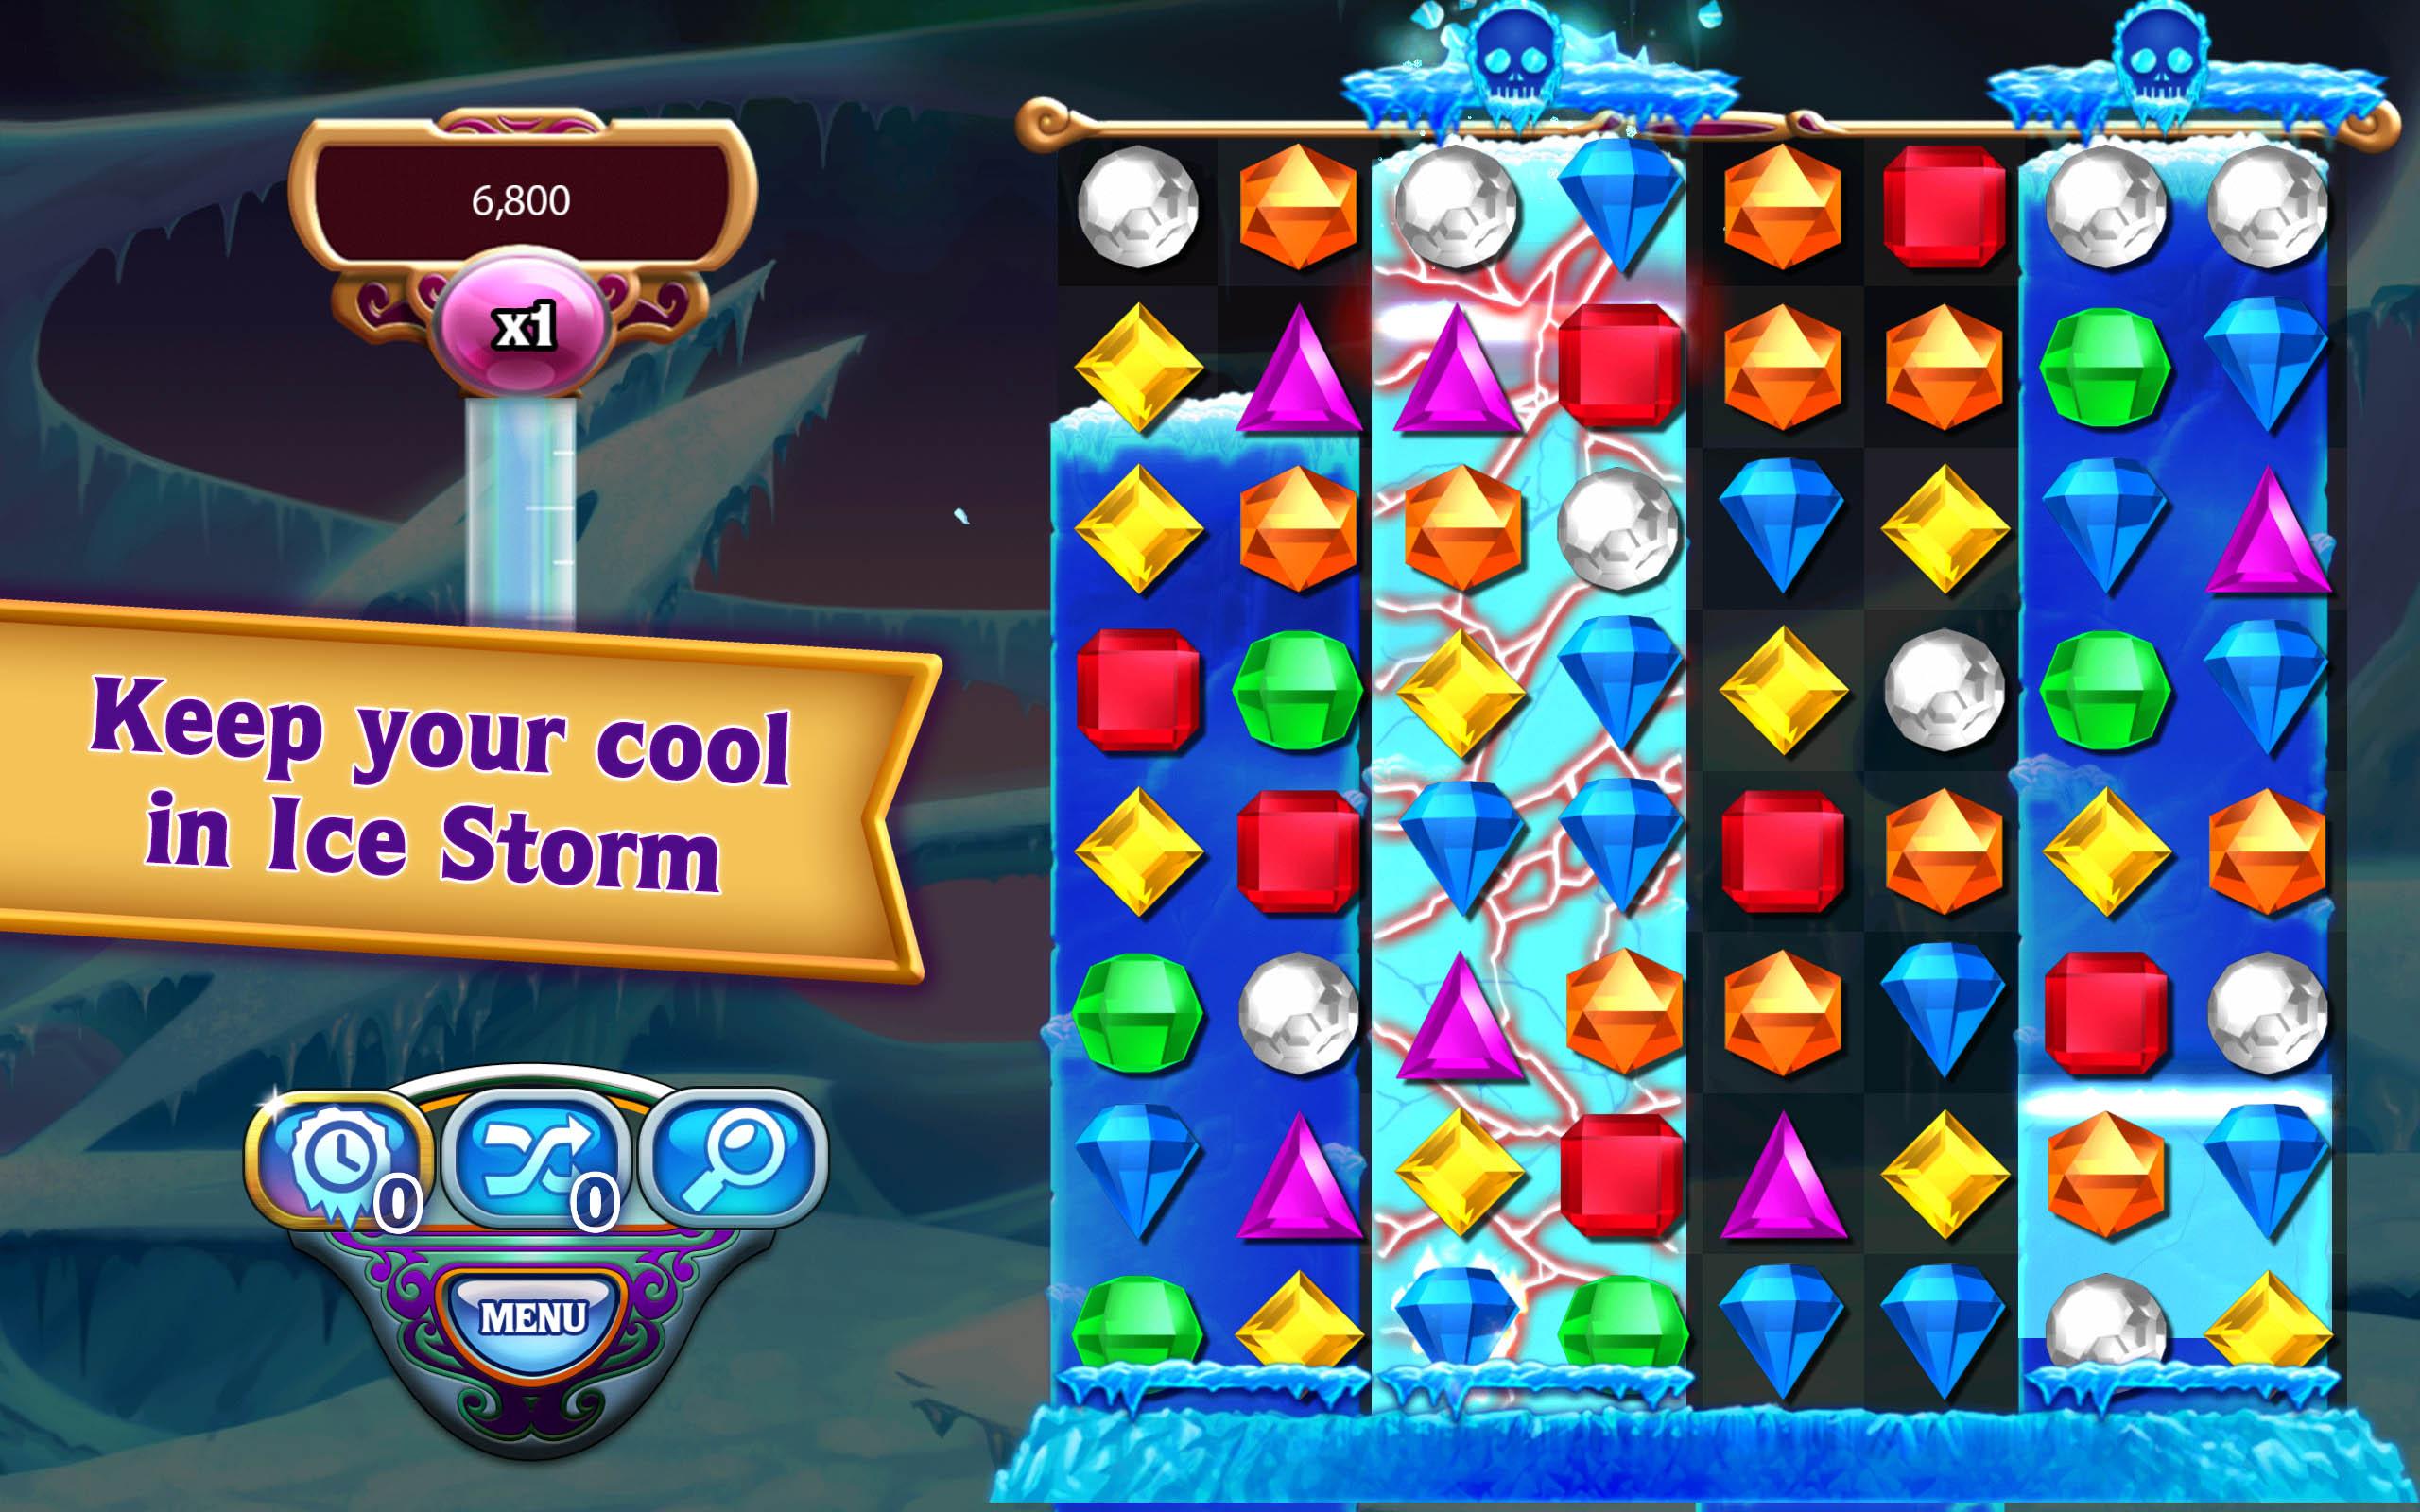 Bejeweled - Play Online on